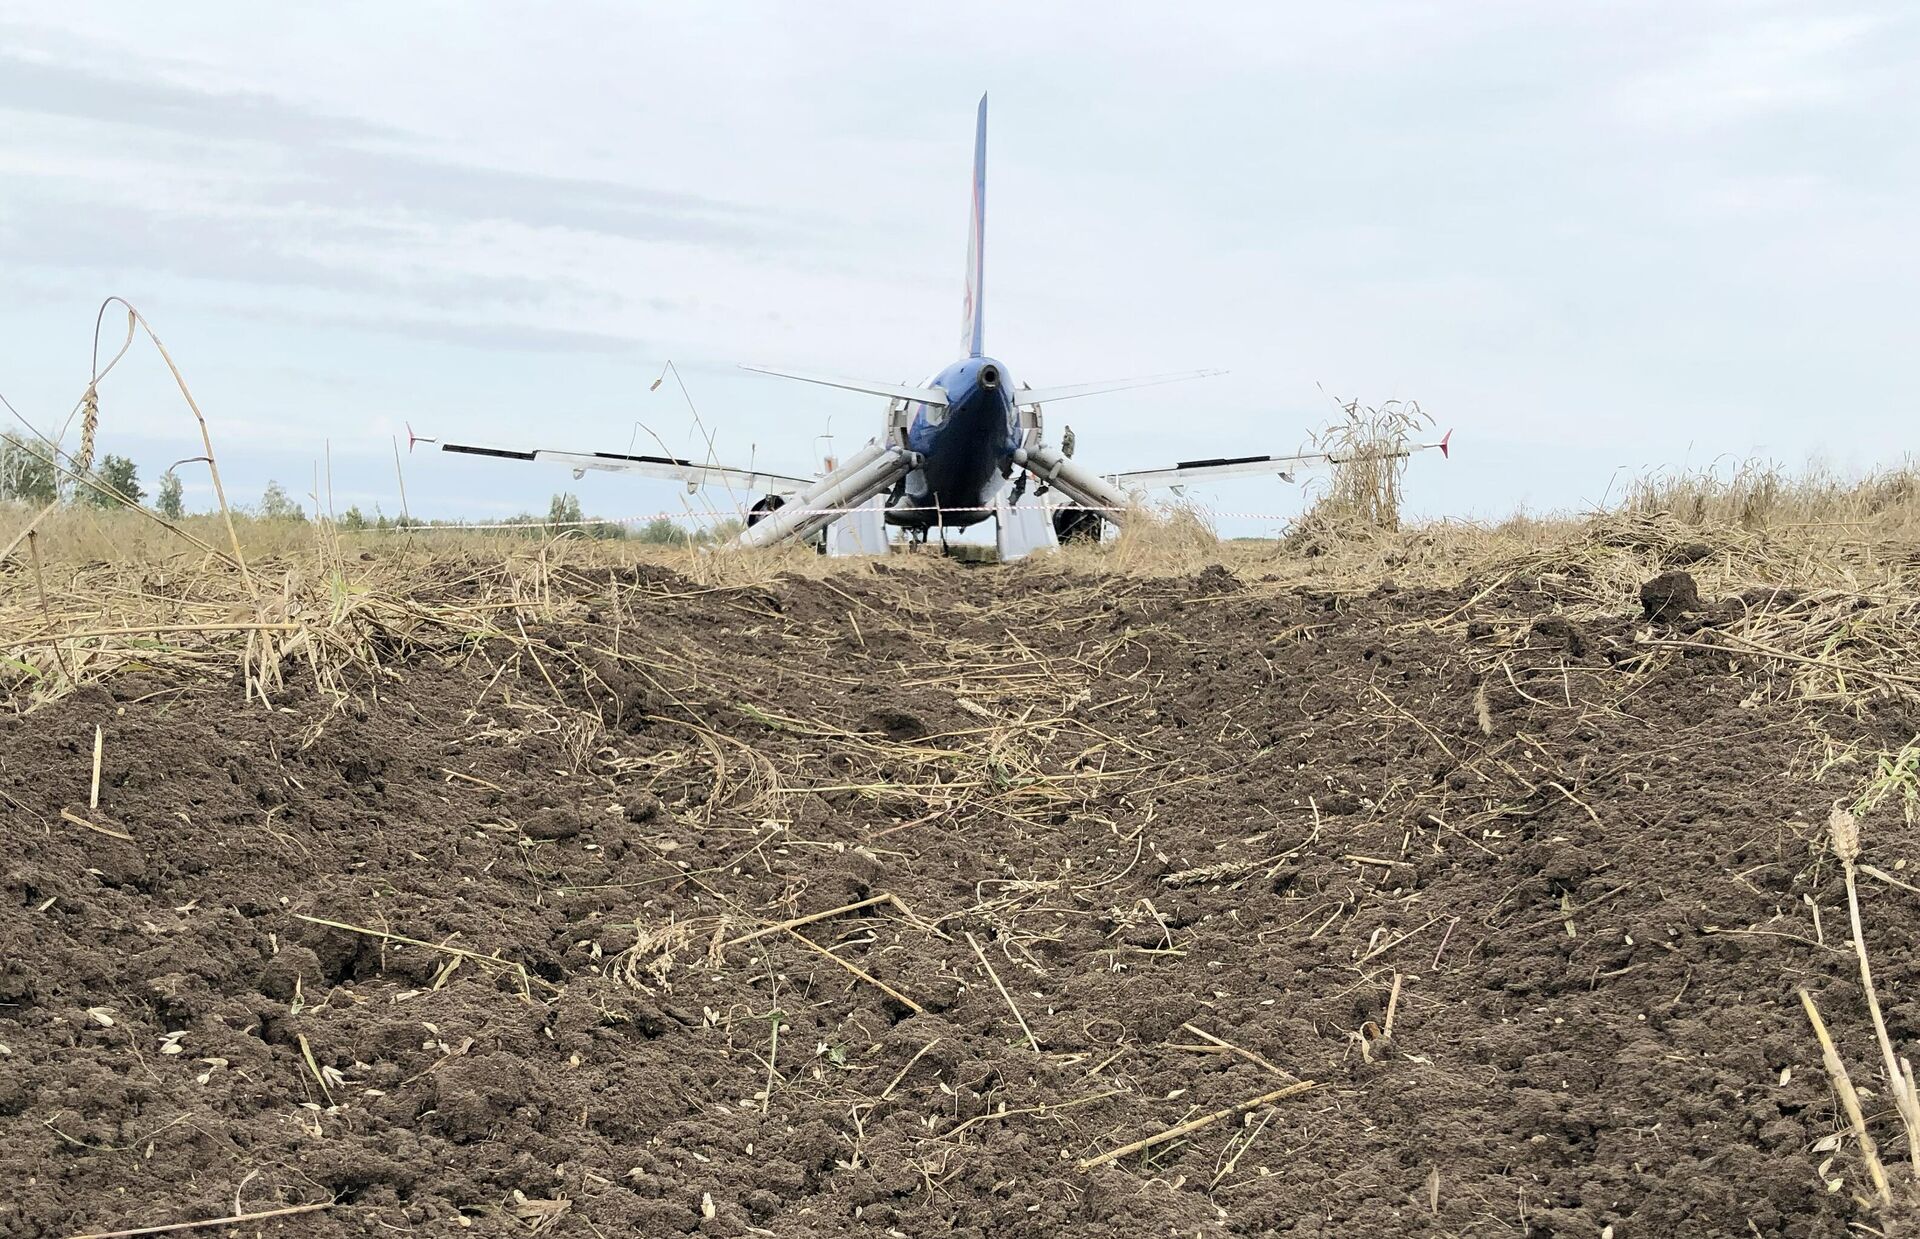 Tracks left by the Ural Airlines Airbus in a local wheat field in Novosibirsk, Siberia after an emergency touchdown. - Sputnik International, 1920, 12.09.2023